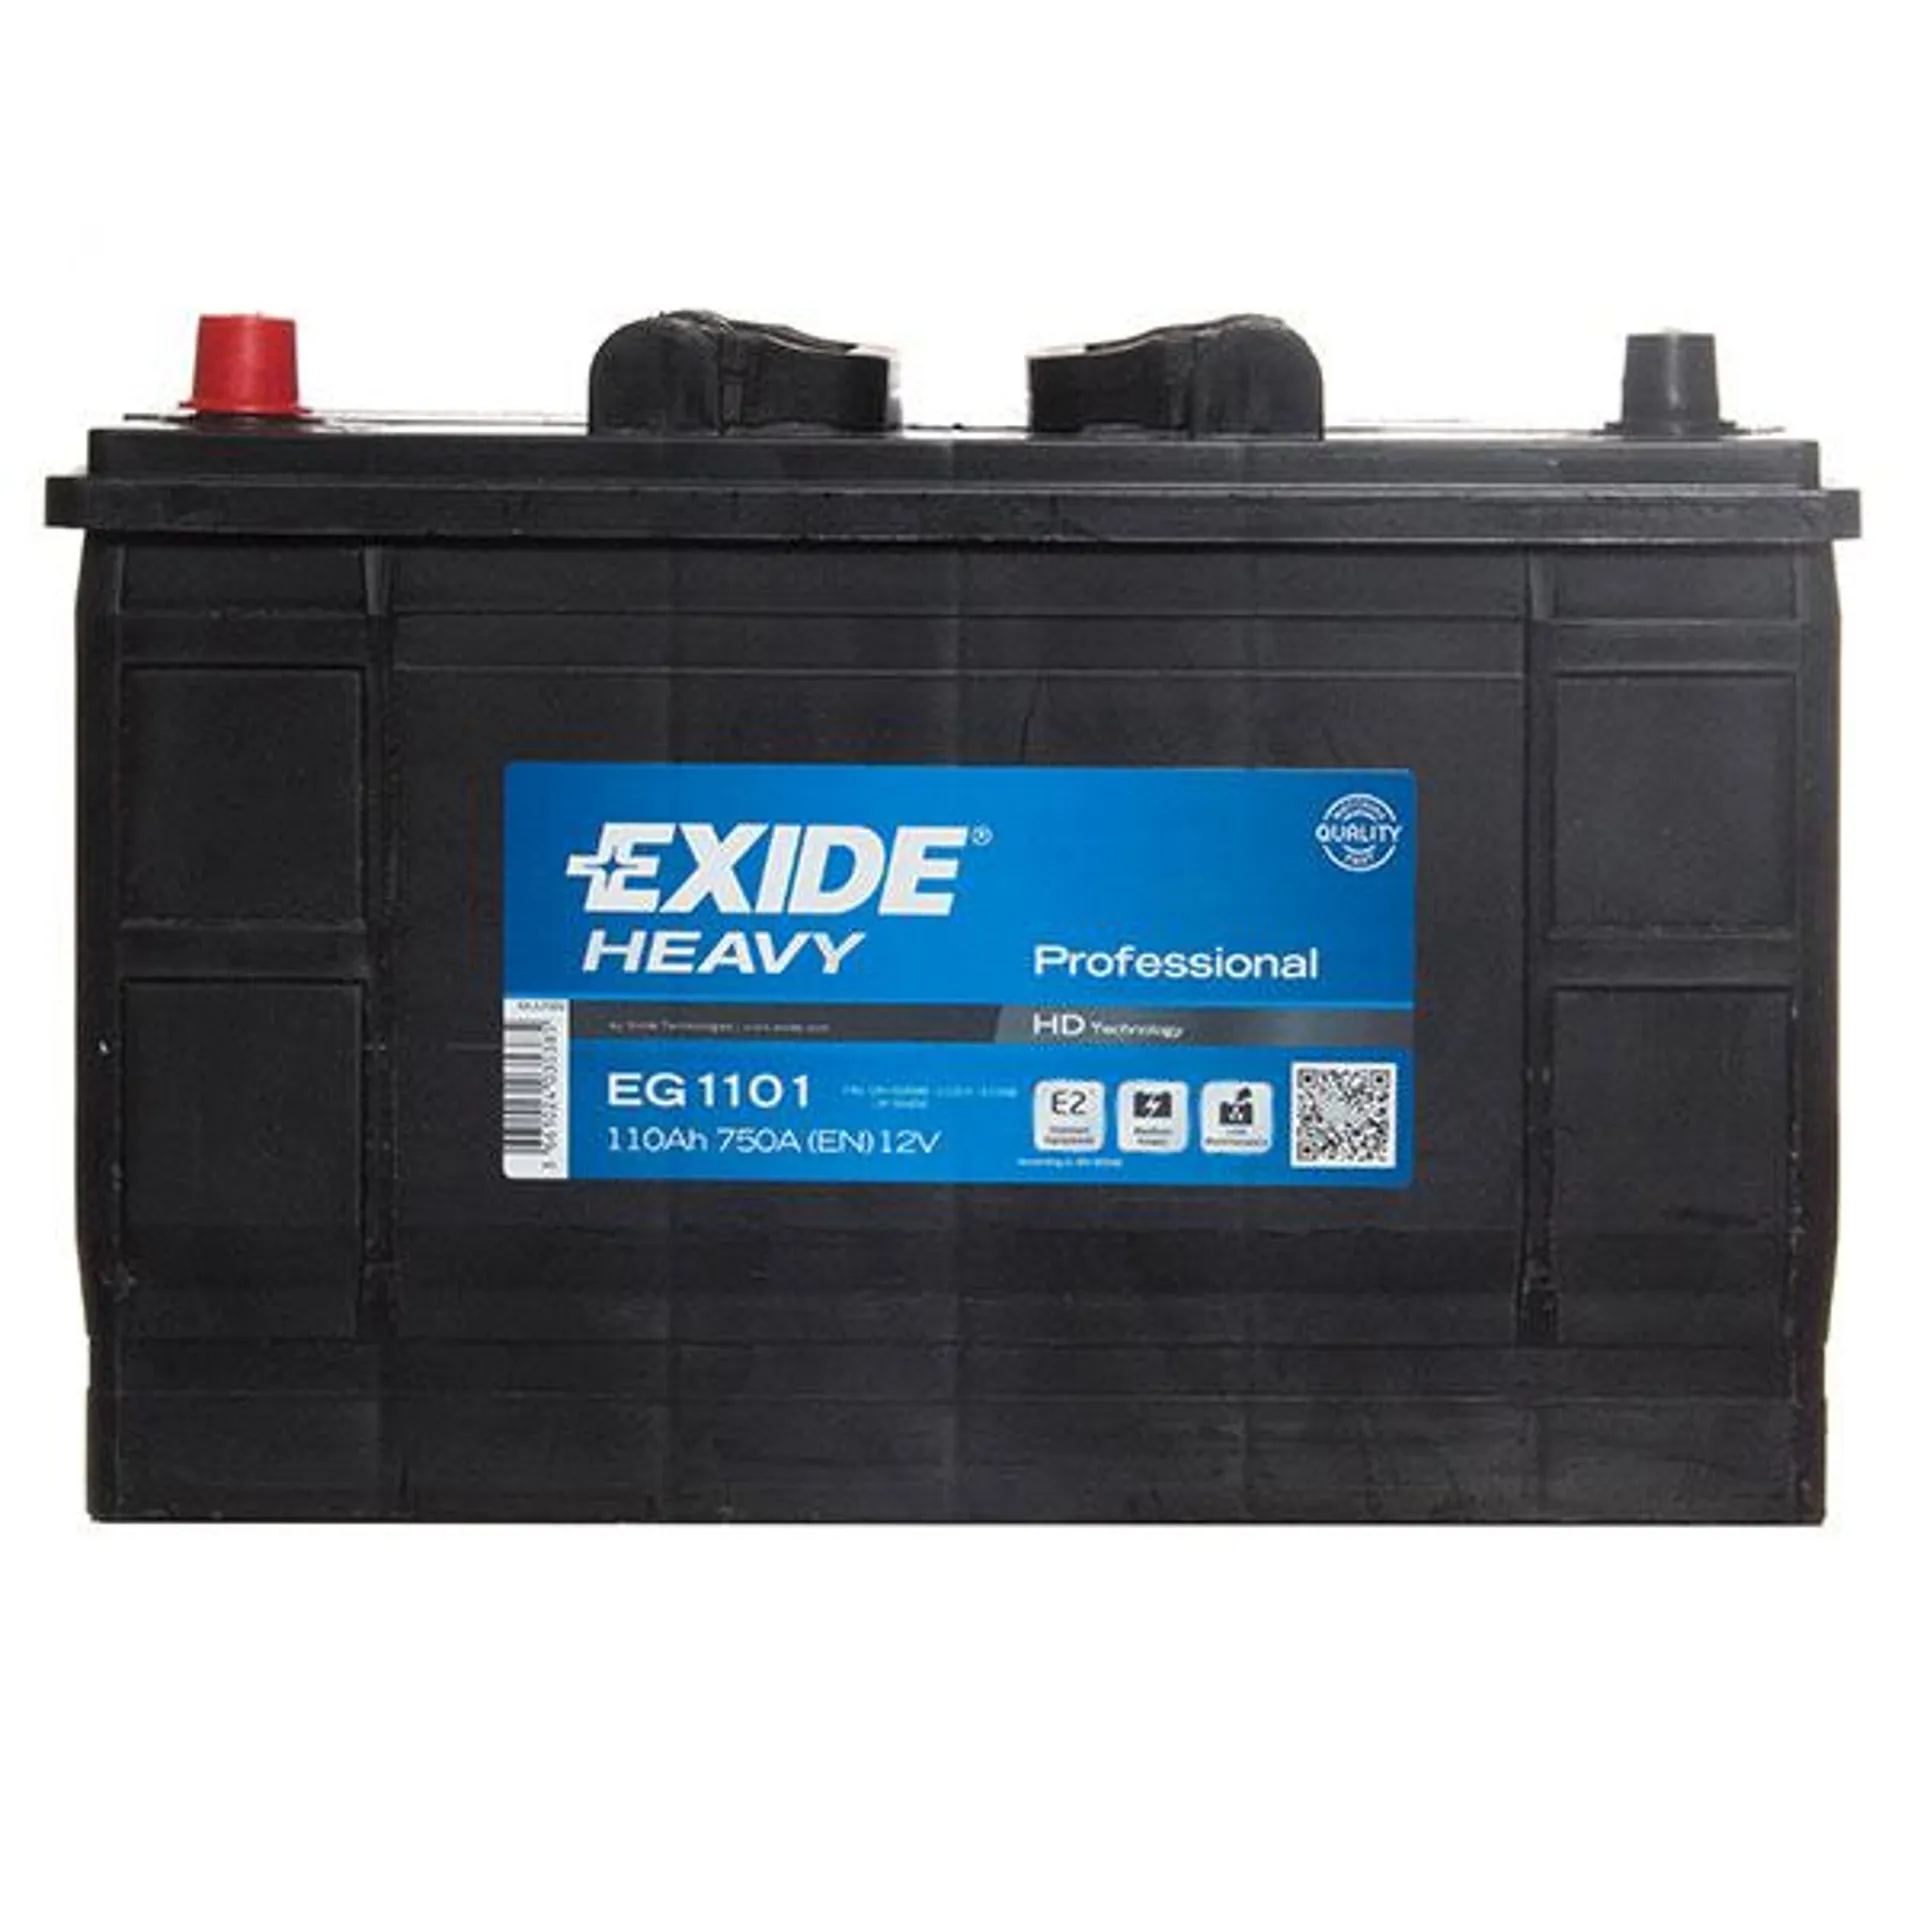 Exide Commercial Battery 664 - 2 Year Guarantee